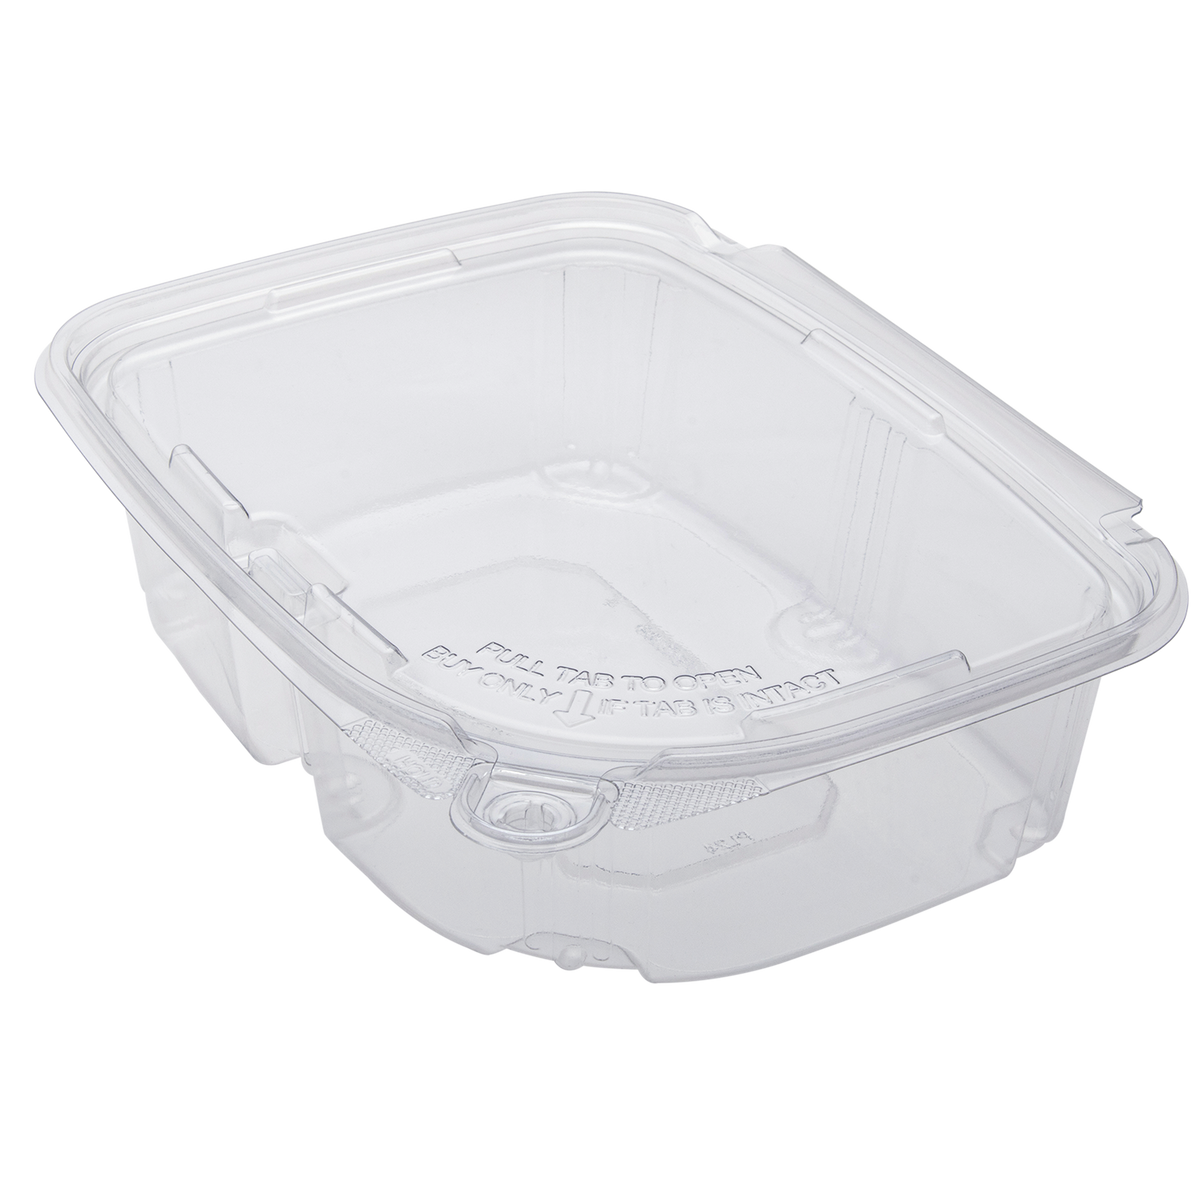 Black Plastic Food Storage Containers for sale